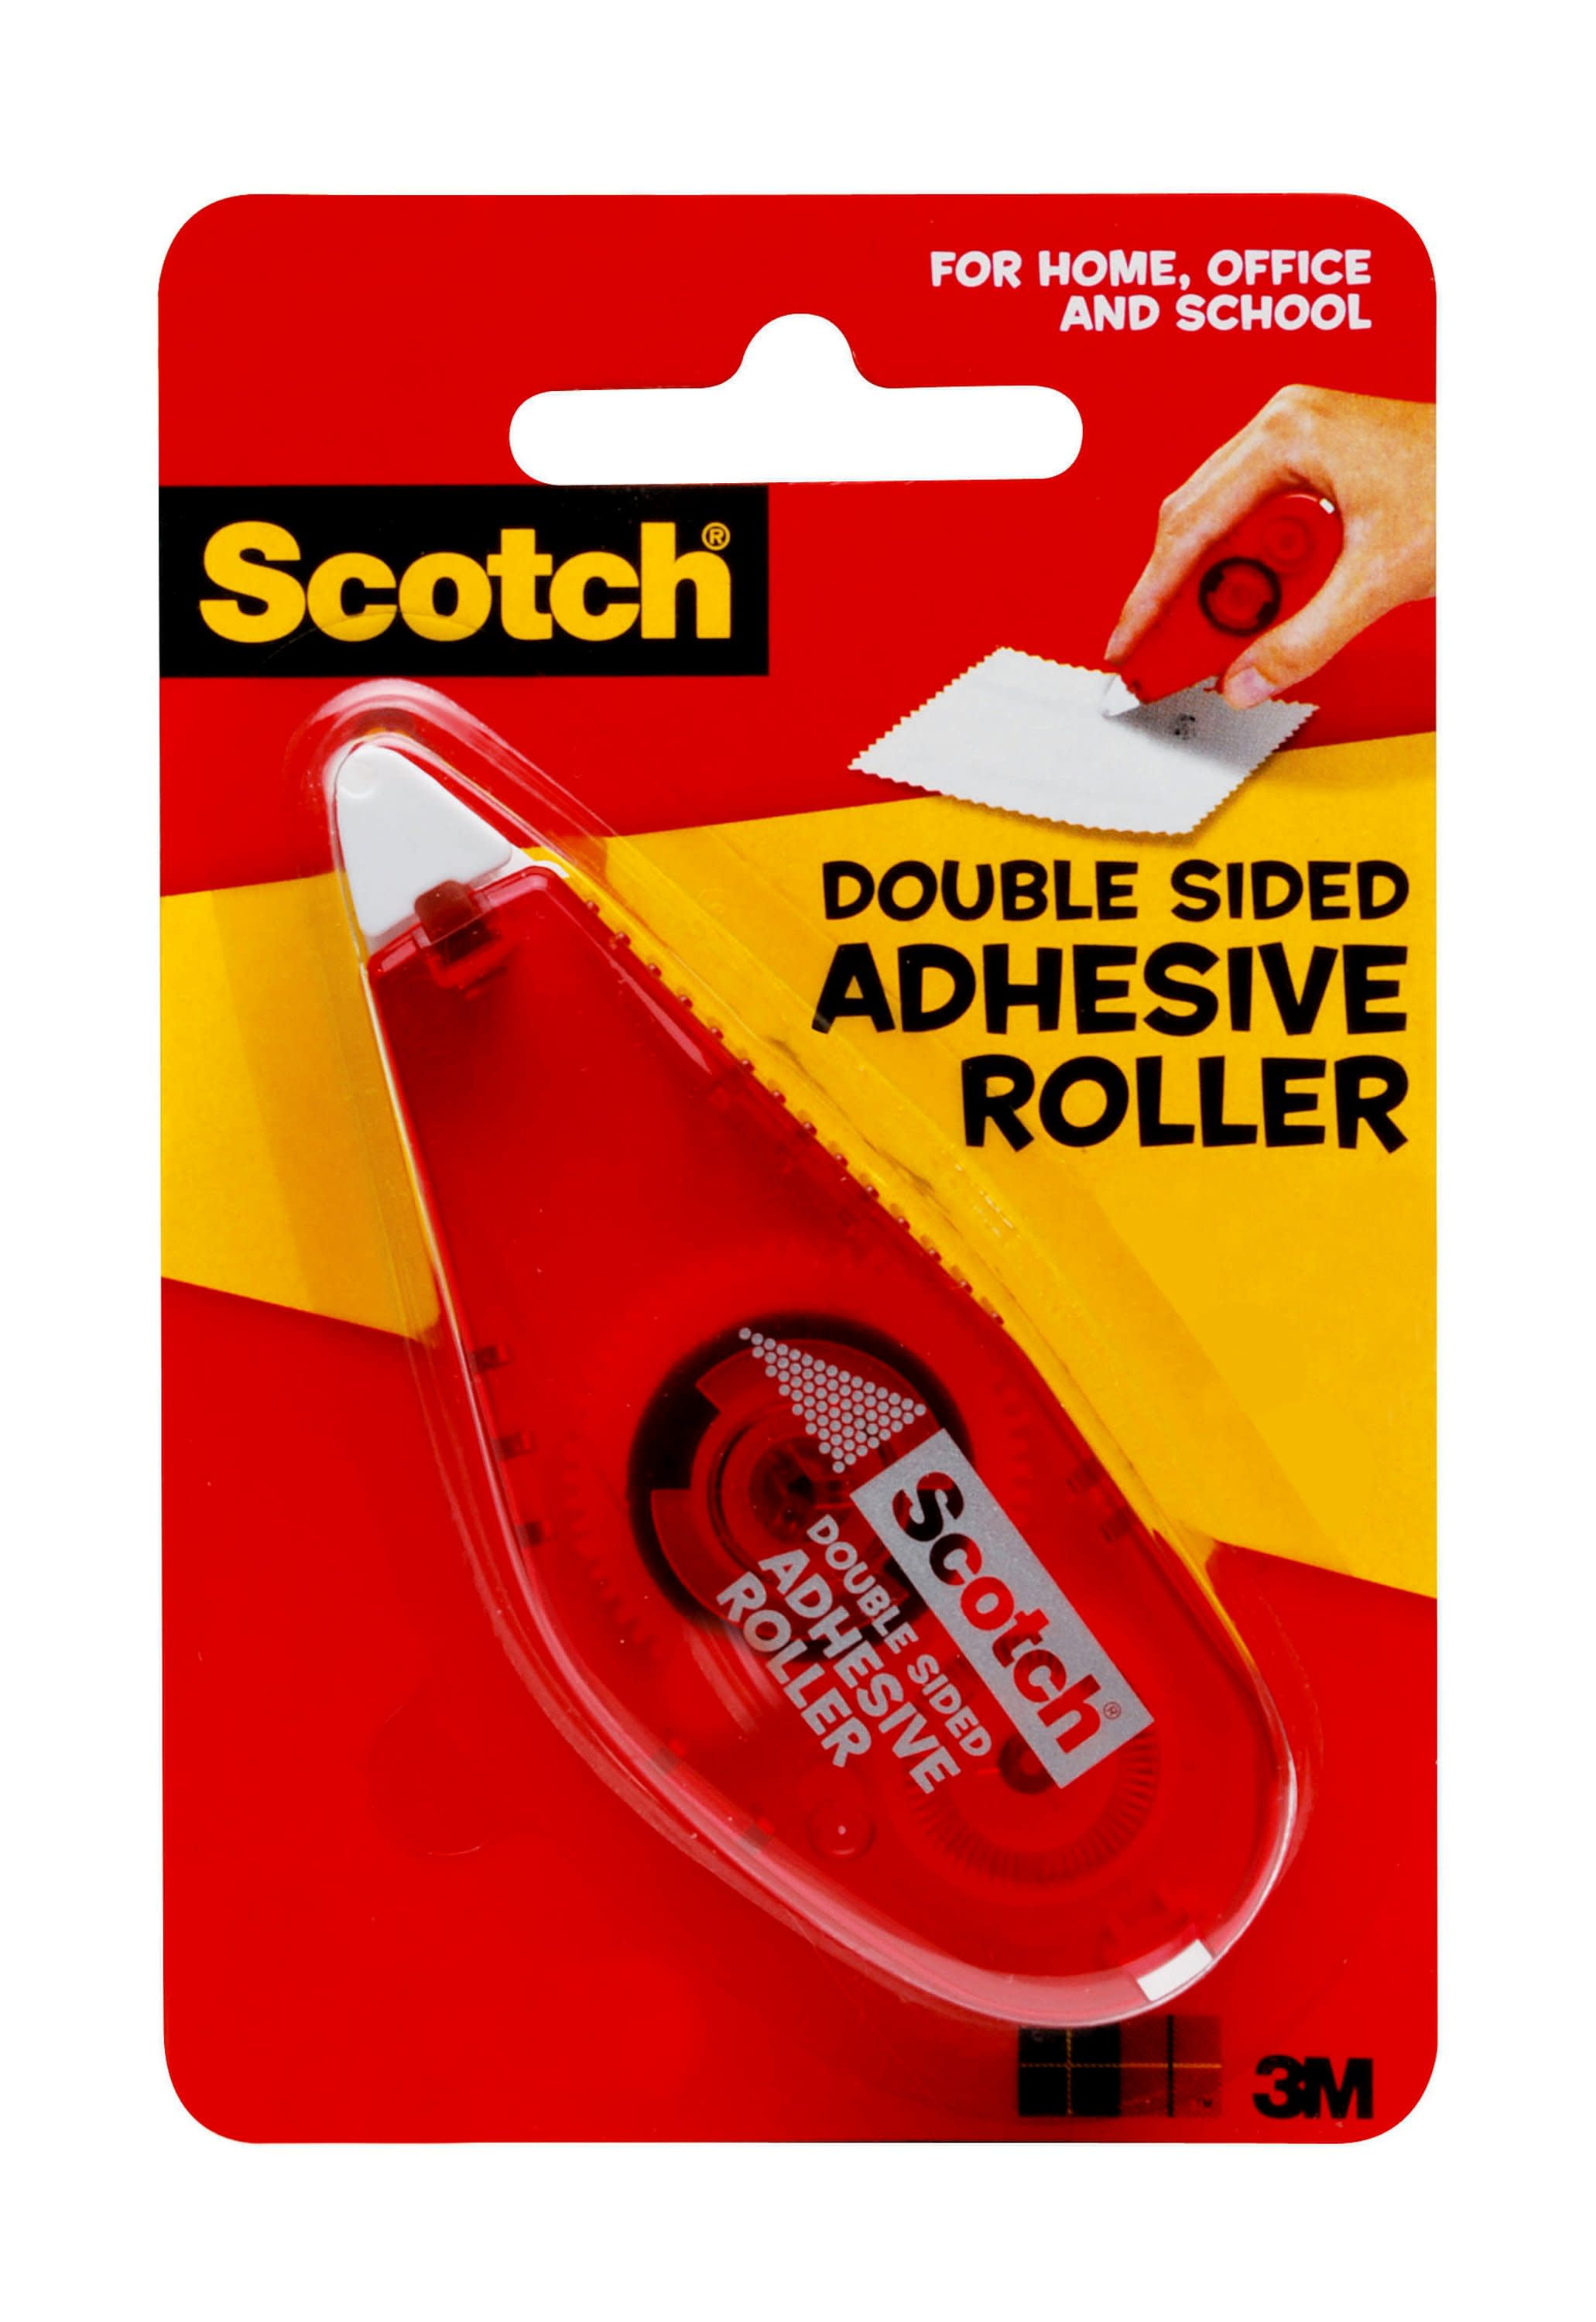 Scotch Adhesive Dot Roller Value Pack.31 in x 49 ft 4 Pack Office and School Projects Great for Home